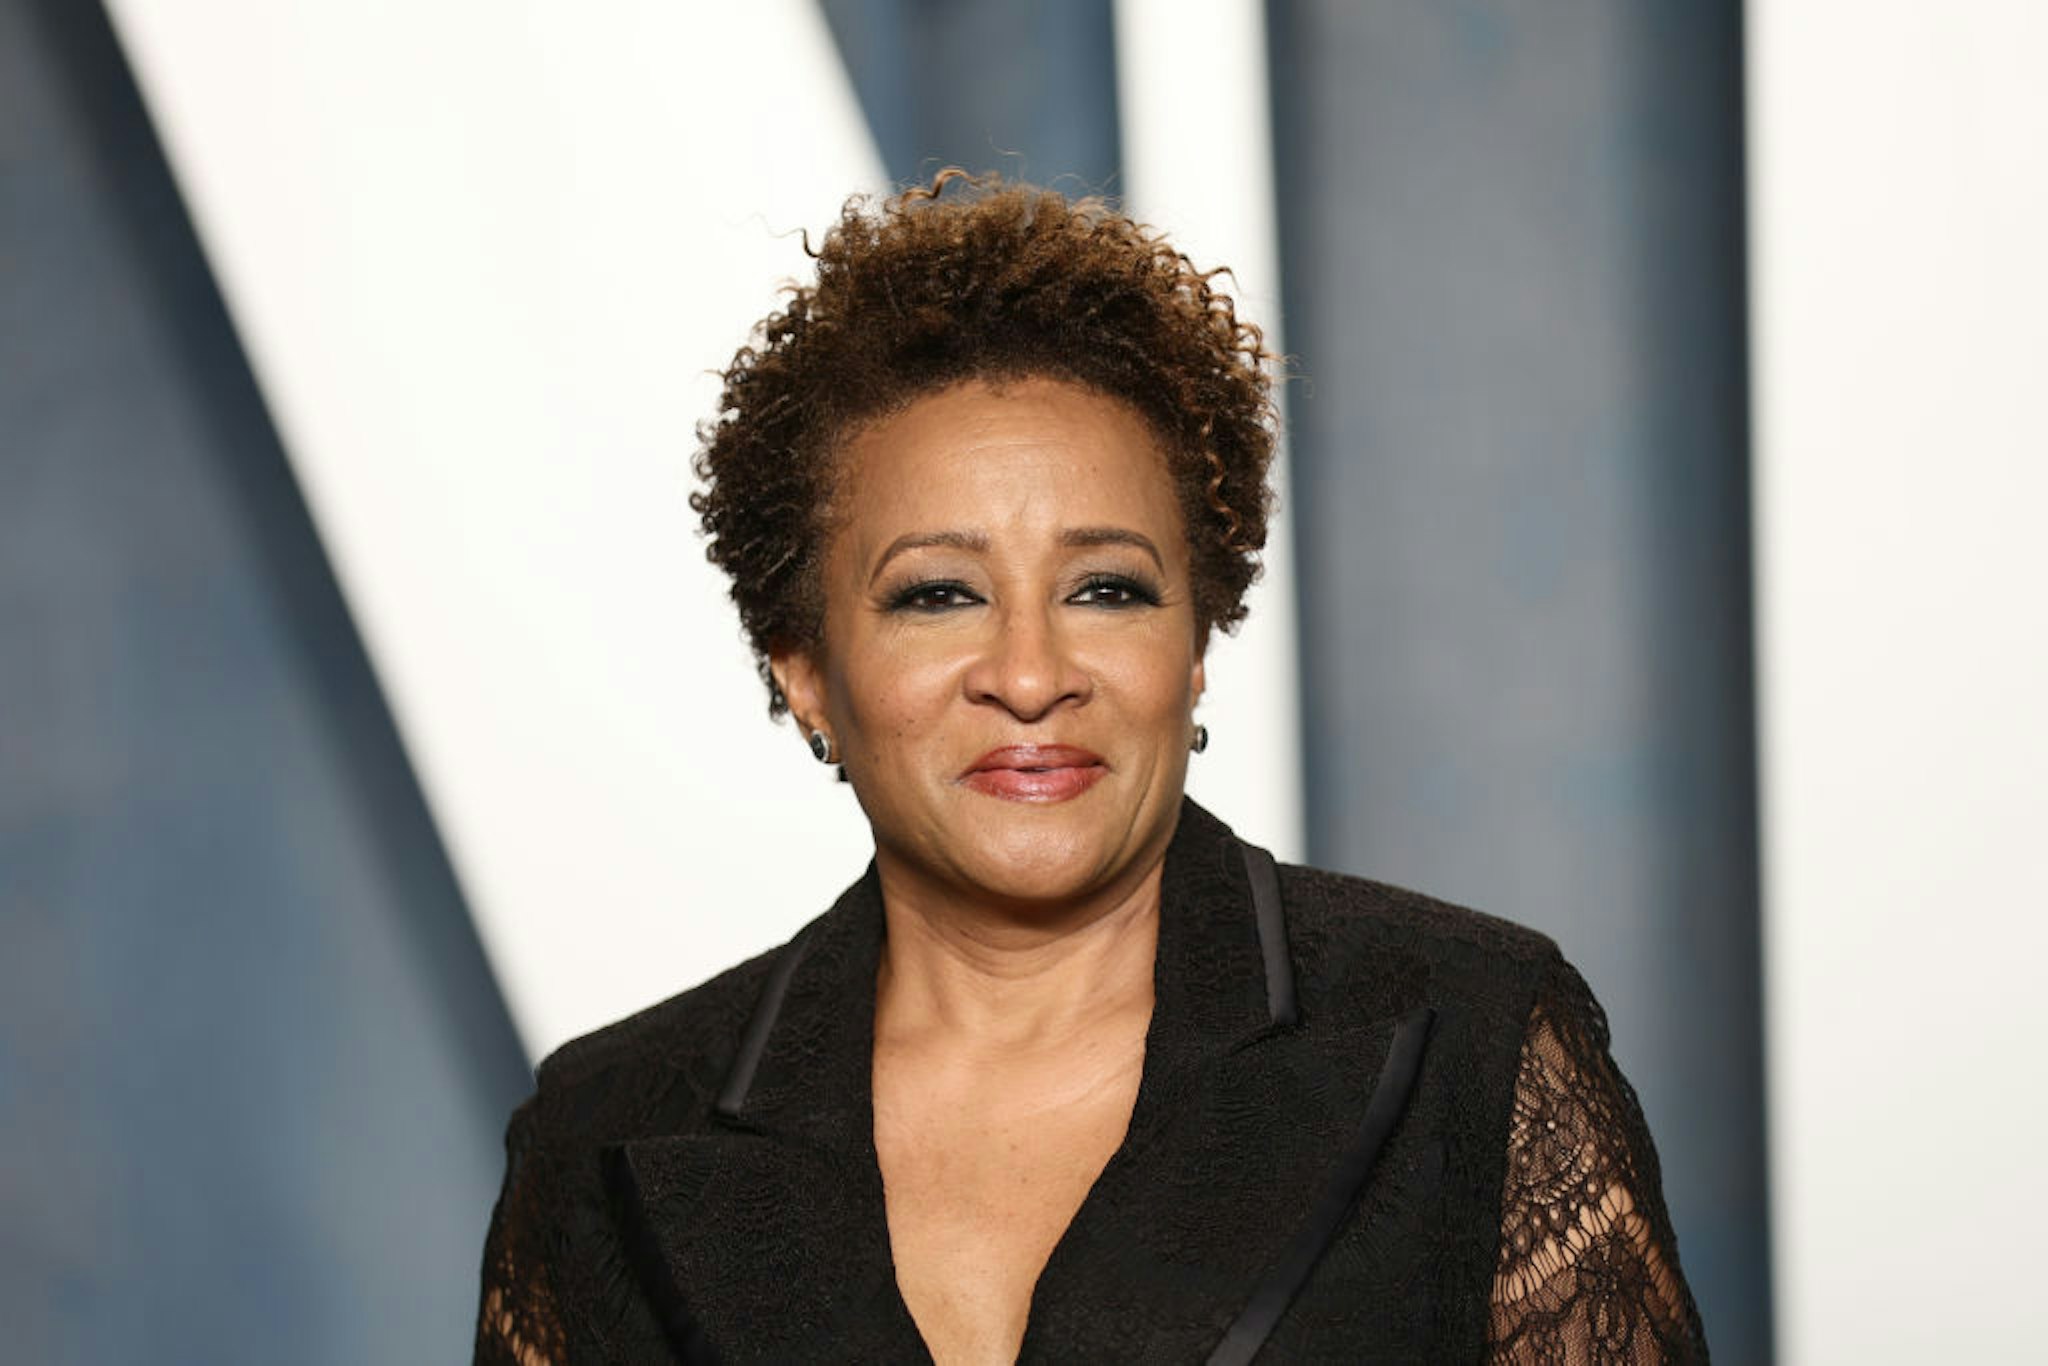 BEVERLY HILLS, CALIFORNIA - MARCH 27: Wanda Sykes attends the 2022 Vanity Fair Oscar Party hosted by Radhika Jones at Wallis Annenberg Center for the Performing Arts on March 27, 2022 in Beverly Hills, California. (Photo by Dimitrios Kambouris/WireImage)